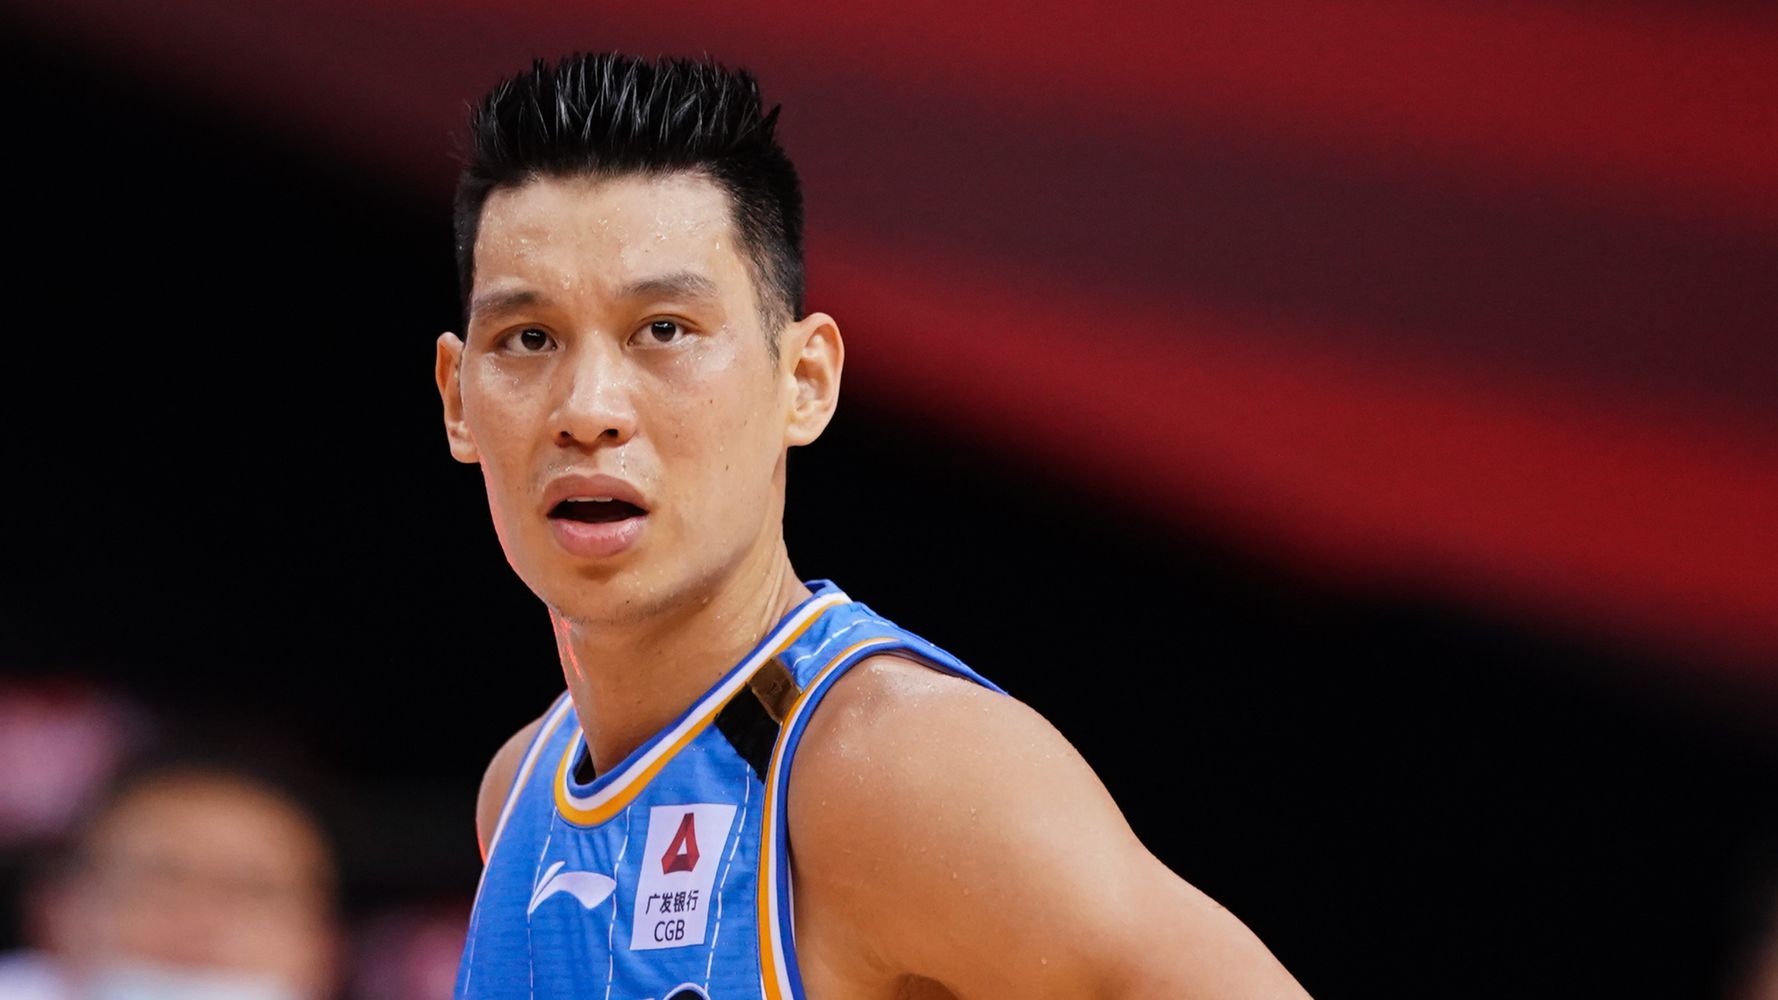 Jeremy Lin says he is not ‘naming or embarrassing’ the person who called him ‘Coronavirus’